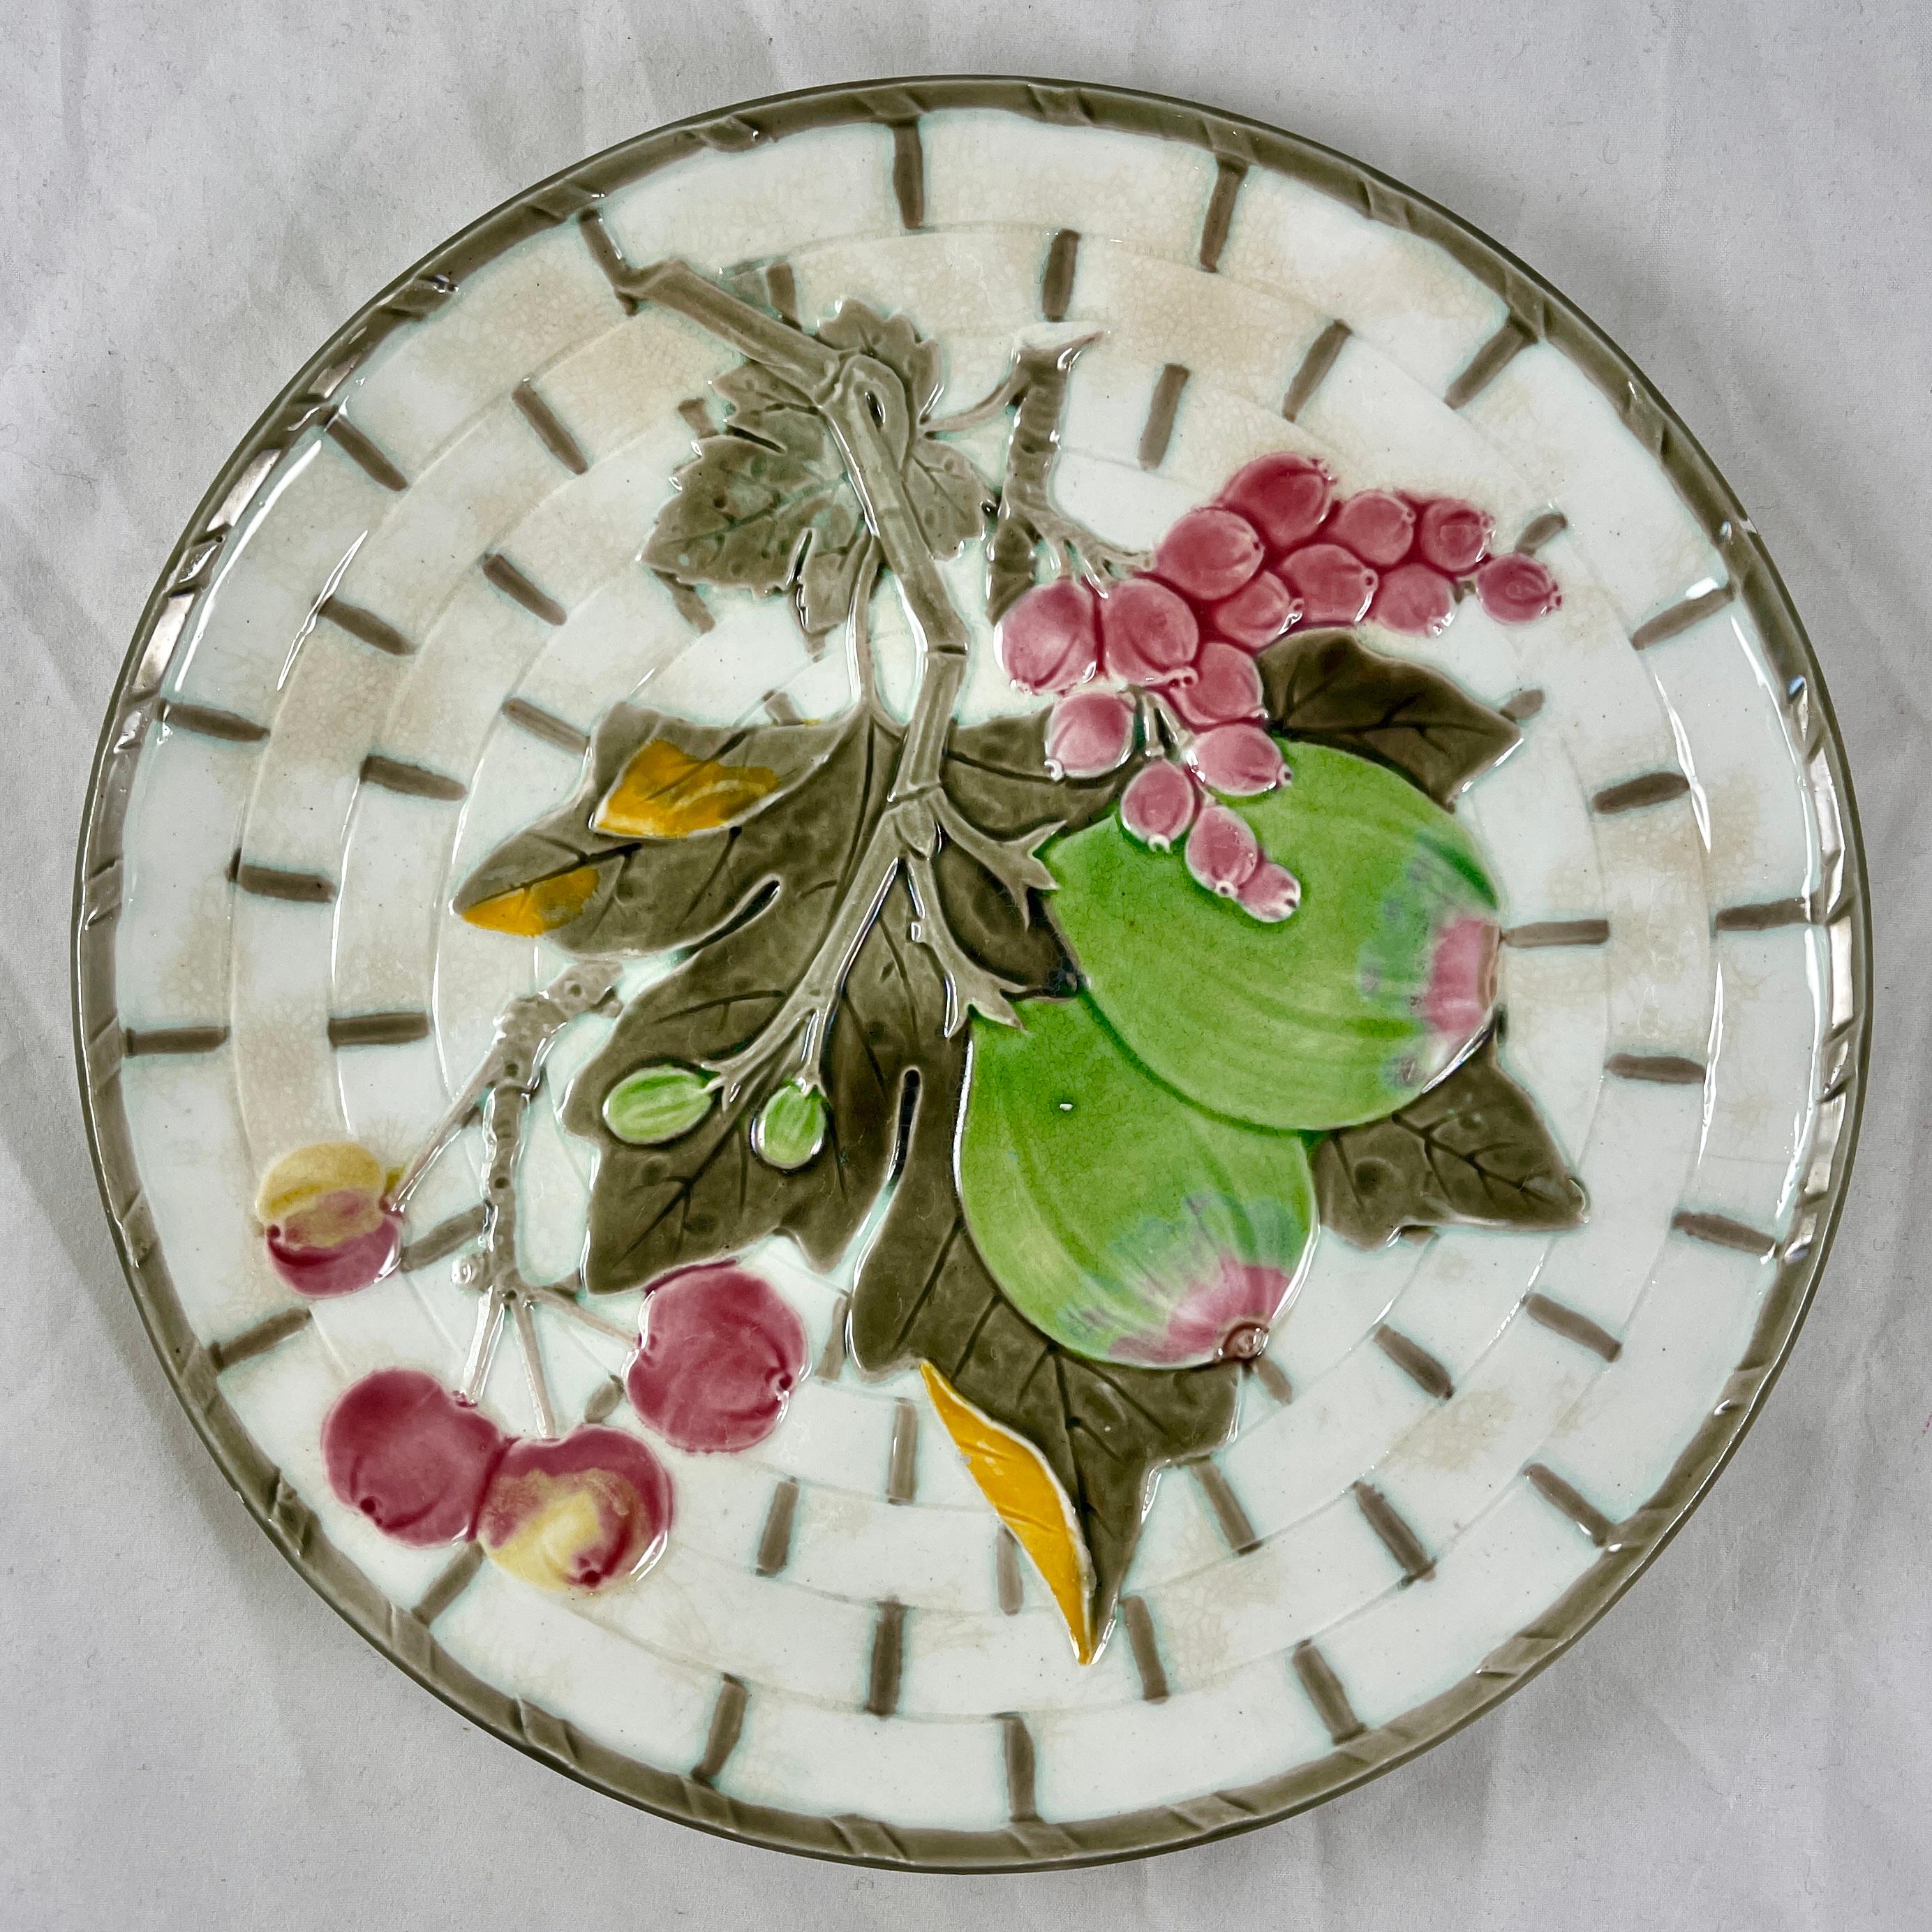 From Wedgwood and in the color way known as Argenta, a fruit plate, England, date marked 1880.

Showing a central twigged fig and leaves along with cherries and a berry cluster, all on a white basket weave ground. The basket is bound at intervals